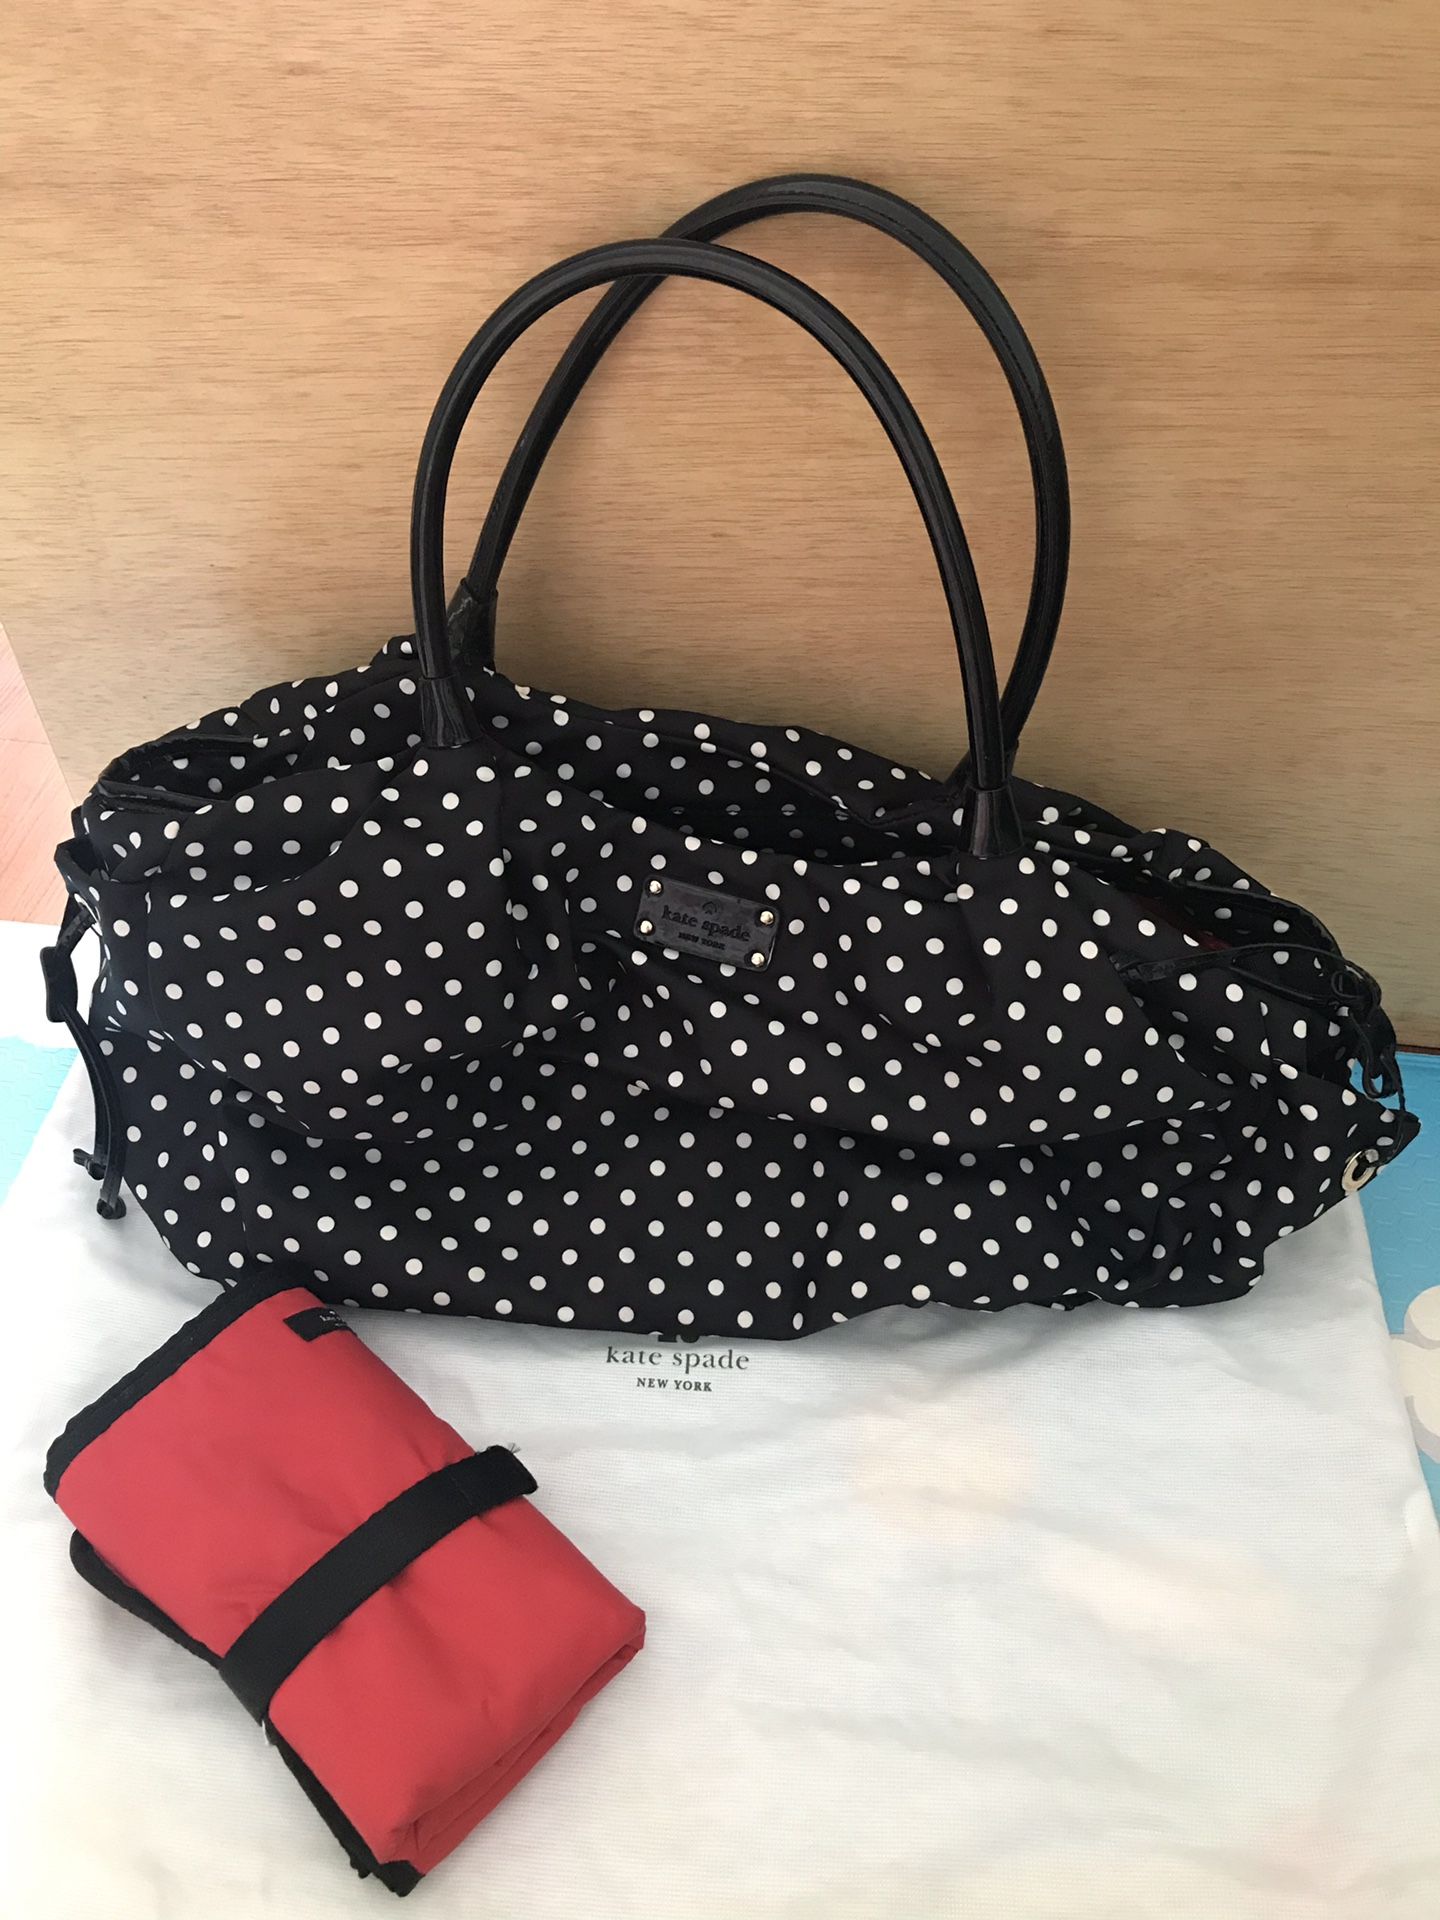 Kate spade diaper bag with changing pad